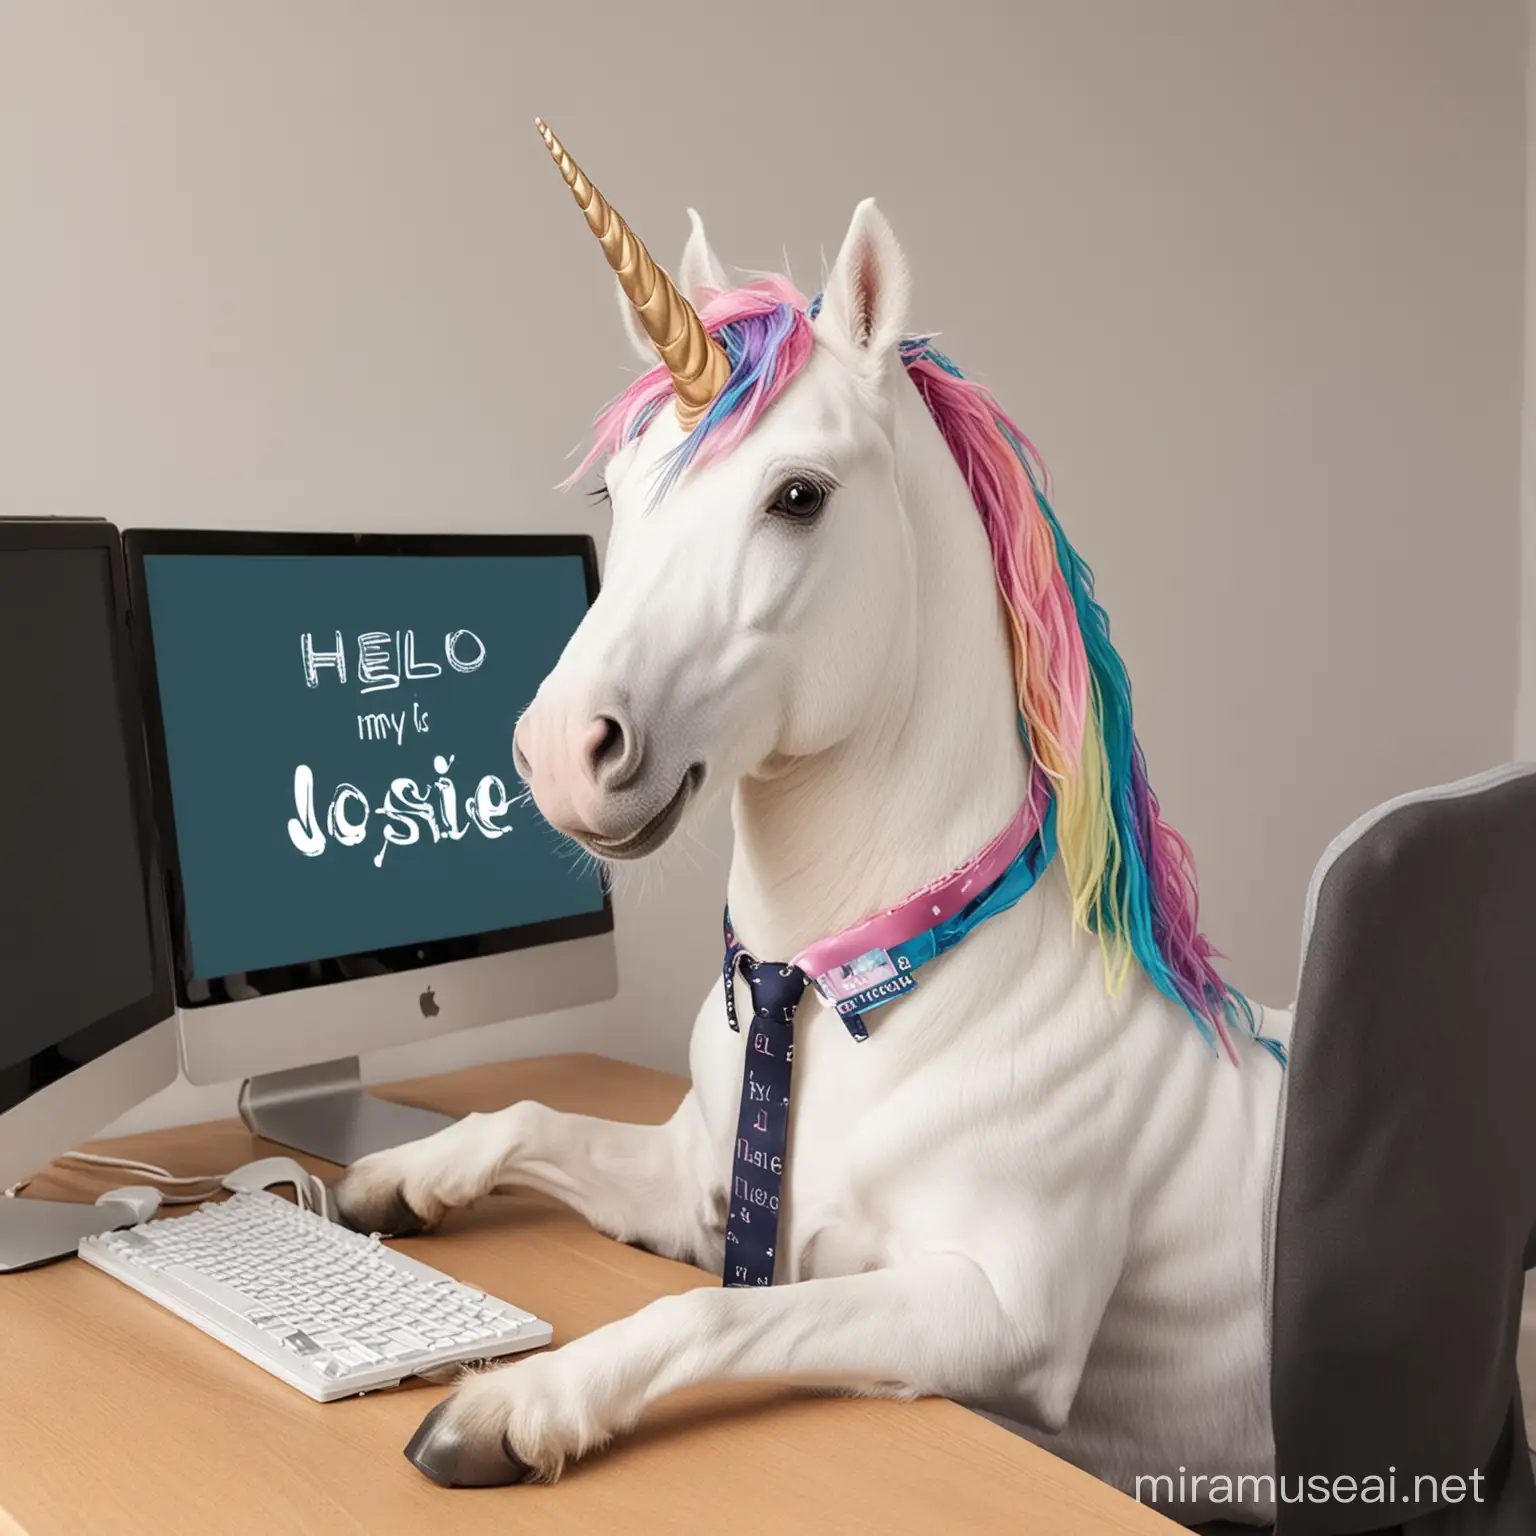 Professional Unicorn Josie Working at Desk with Name Tag